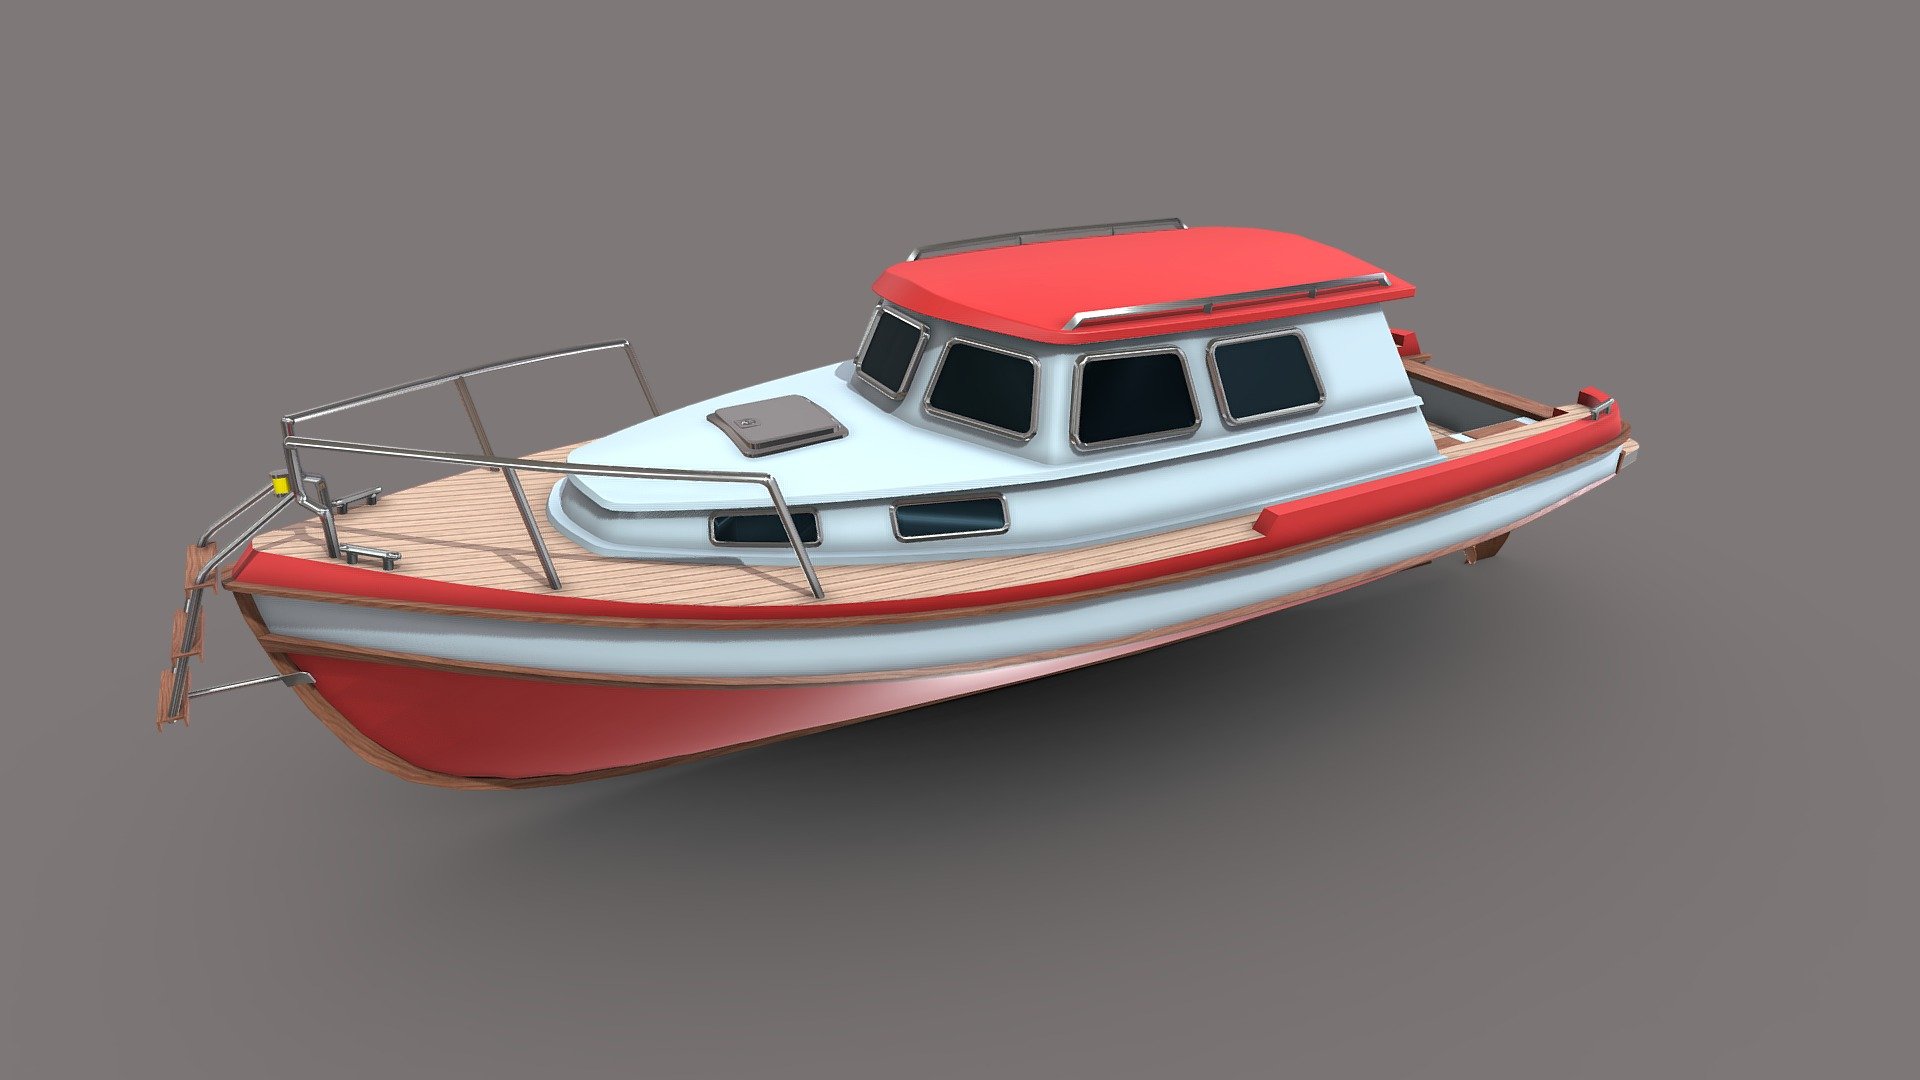 Fishing Boat PBR




-Low-poly ready to use in Games, AR/VR (18,305  Tris)

-Textures are in PNG format 4096x4096 PBR metalness 1 set.

-Files unit: Centimeters

-Available formats: MAX 2018 and 2015, OBJ, MTL, FBX, .tbscene.

-If you need any other file format you can always request it.

-All formats include materials and textures.
 - Fishing Boat - Buy Royalty Free 3D model by MaX3Dd 3d model